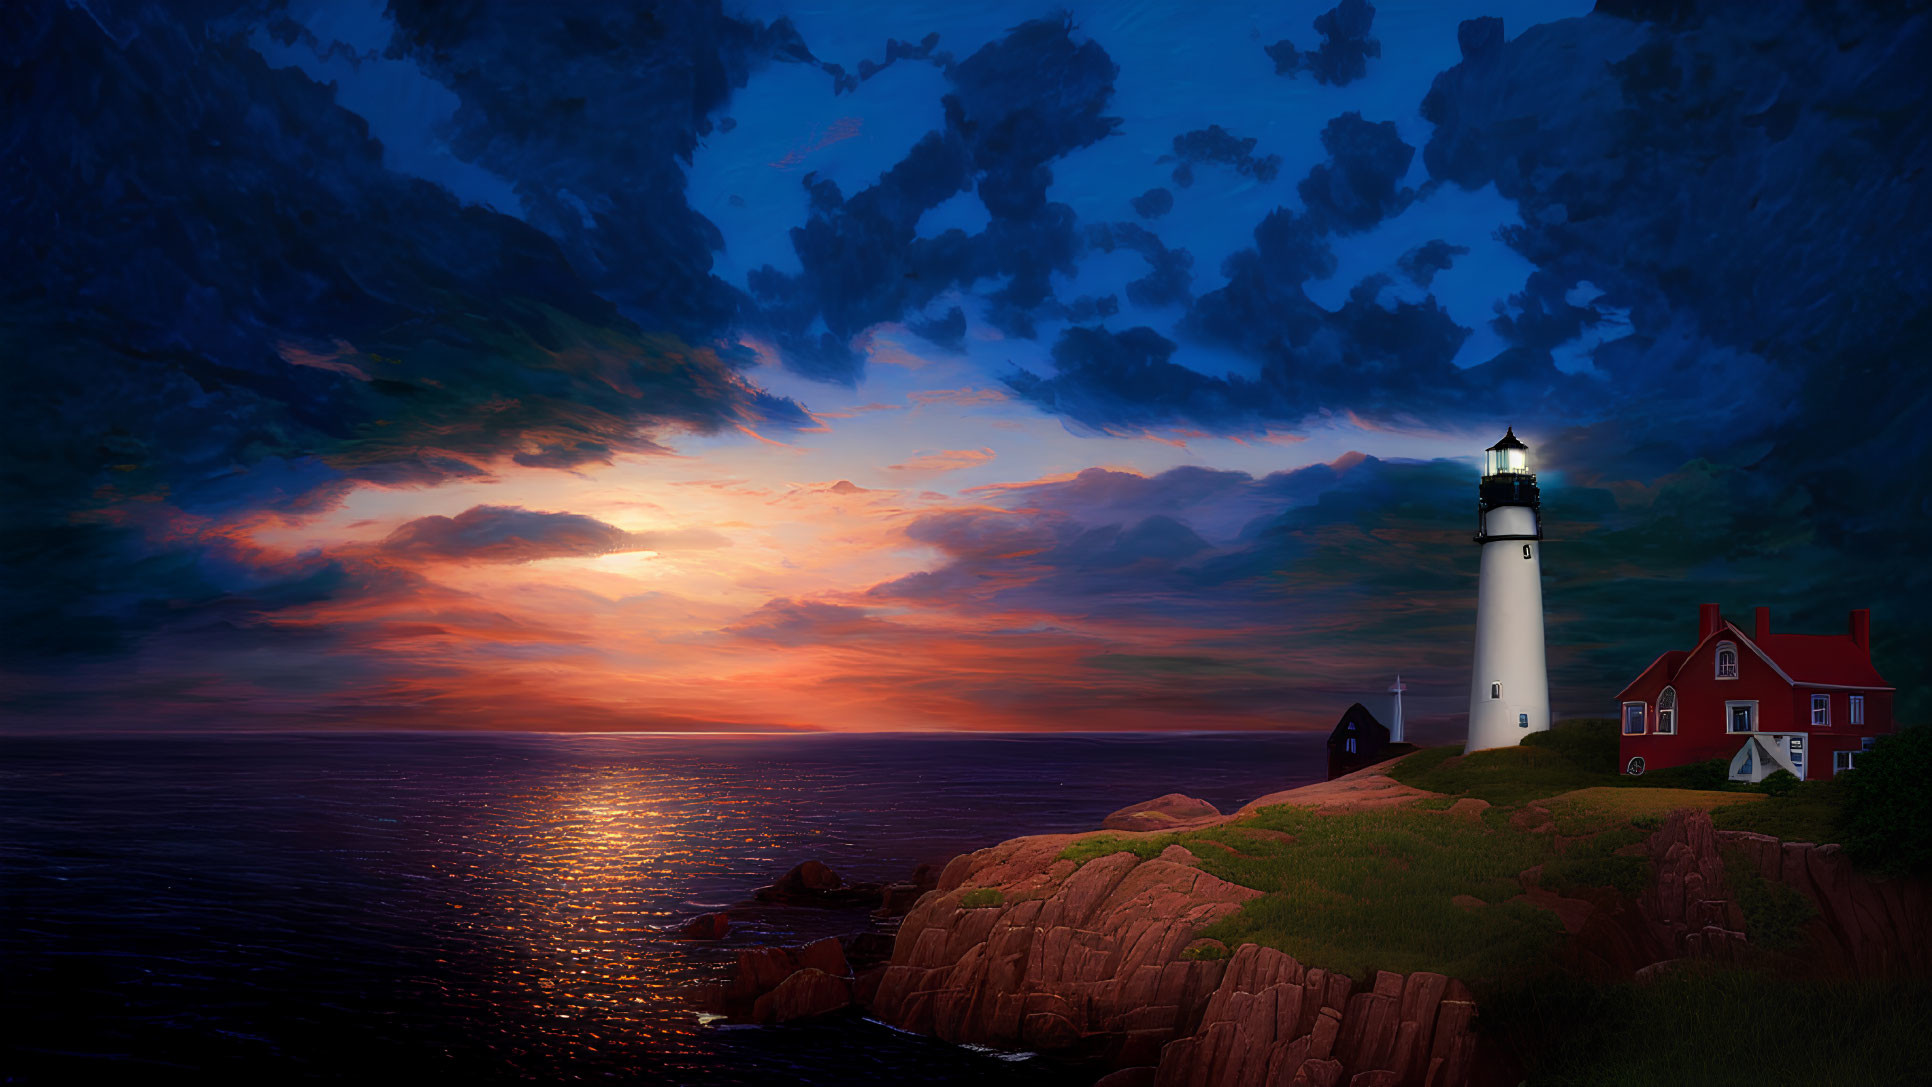 Lighthouse on rocky coastline with red-roofed building at sunset